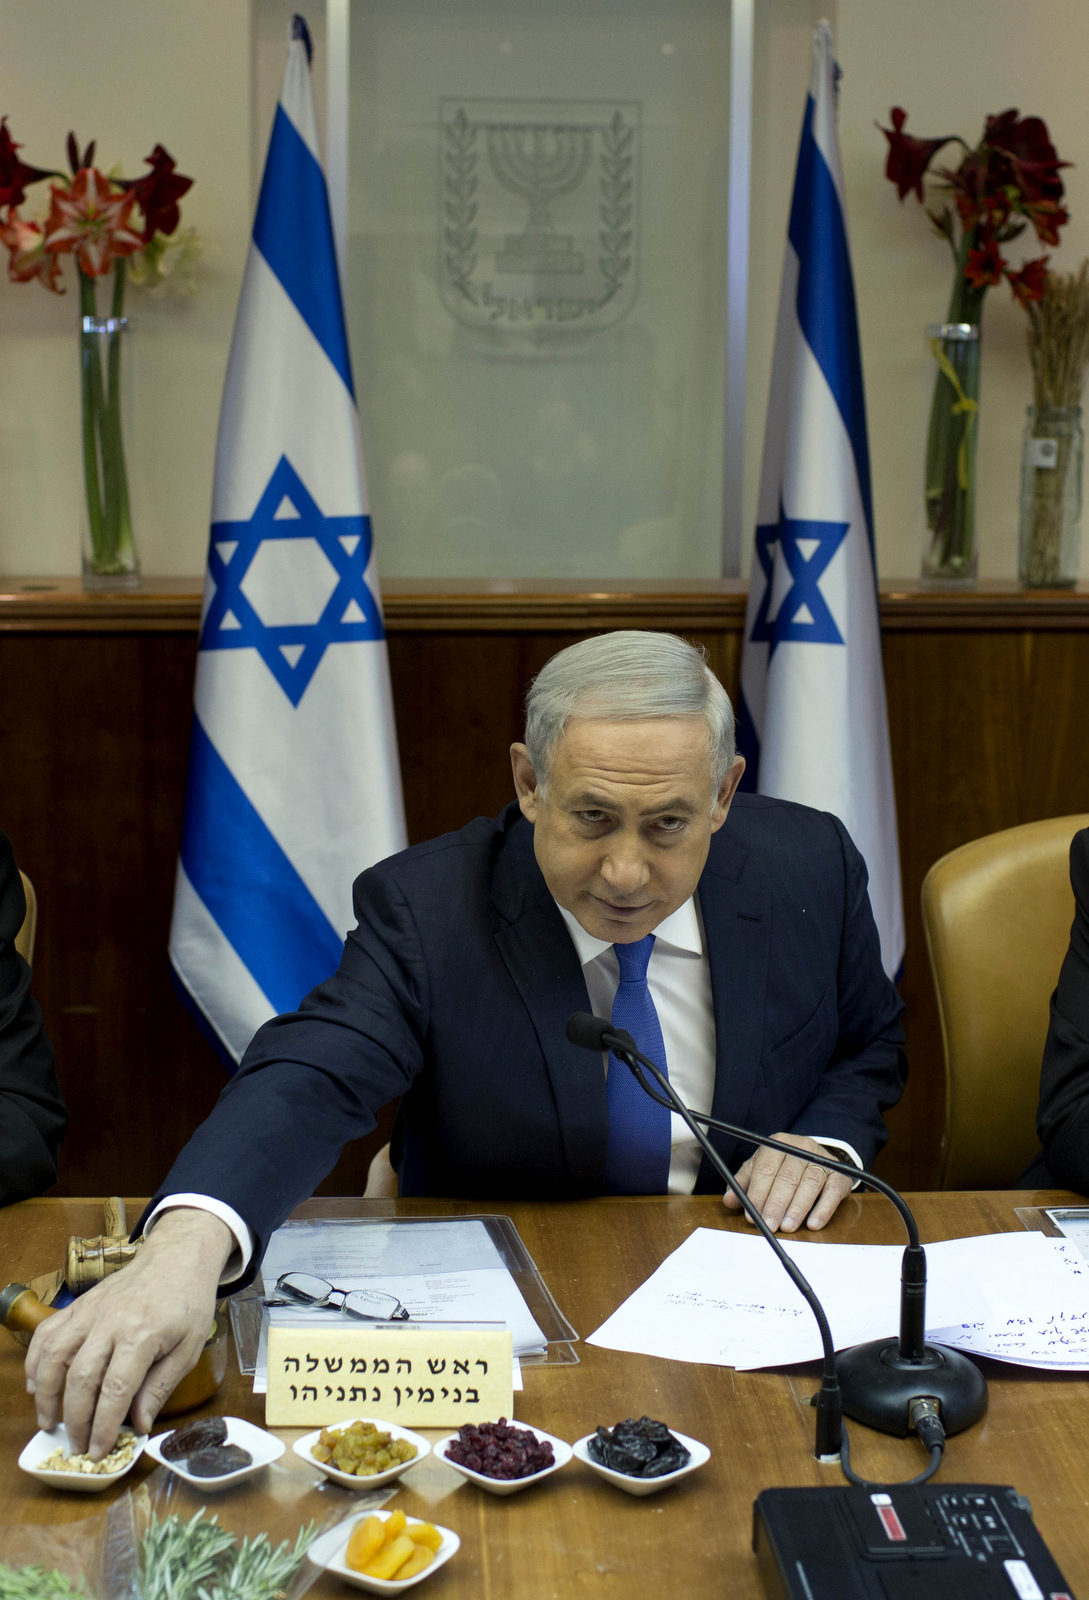 Israel's Prime Minister Benjamin Netanyahu, center, eats fruit during the weekly cabinet meeting, in Jerusalem, Sunday, Jan. 24, 2016. Netanyahu has demanded additional aid from the U.S. on top of the more than $3 Billion Israel already receives. (Abir Sultan/Pool Photo via AP)A